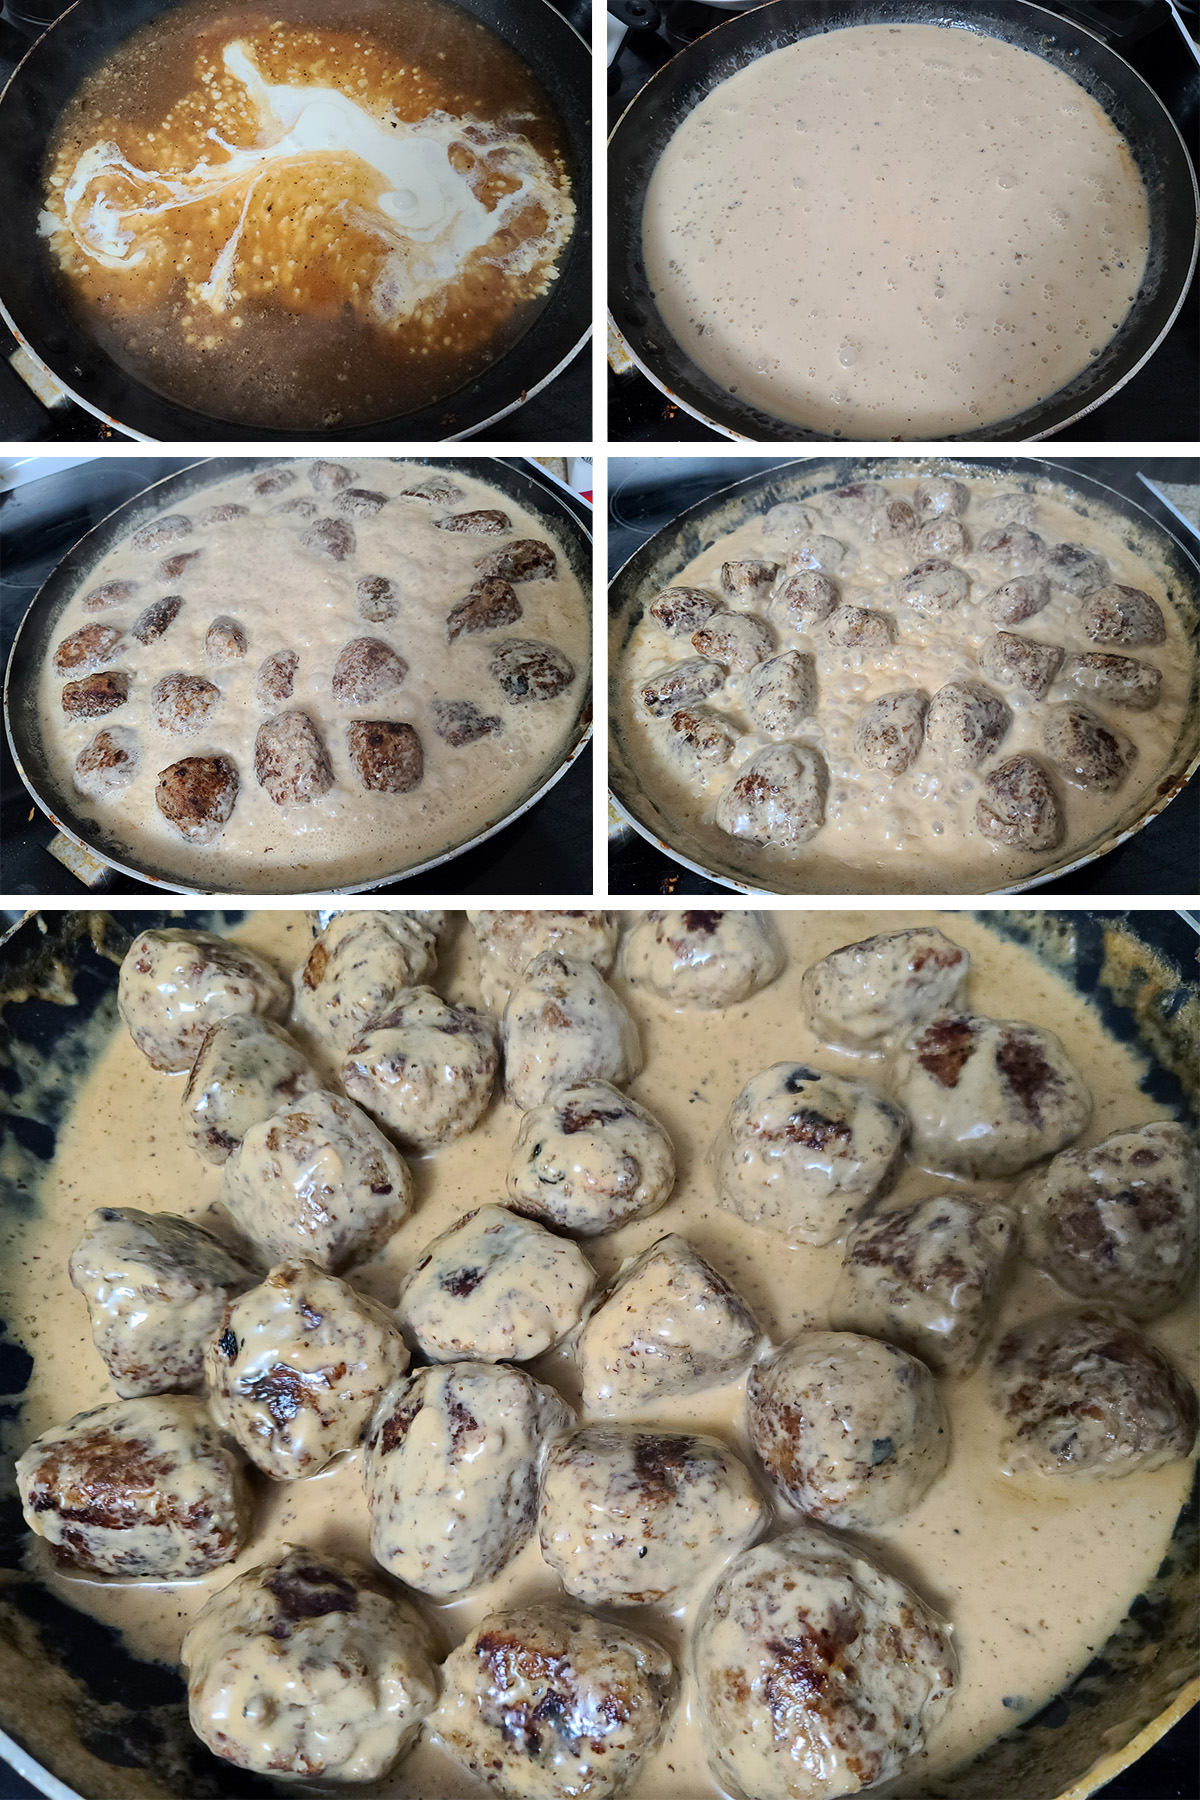 A 5 part image showing the cream being added to the IKEA meatball sauce, and the low carb meatballs being cooked in the sauce.